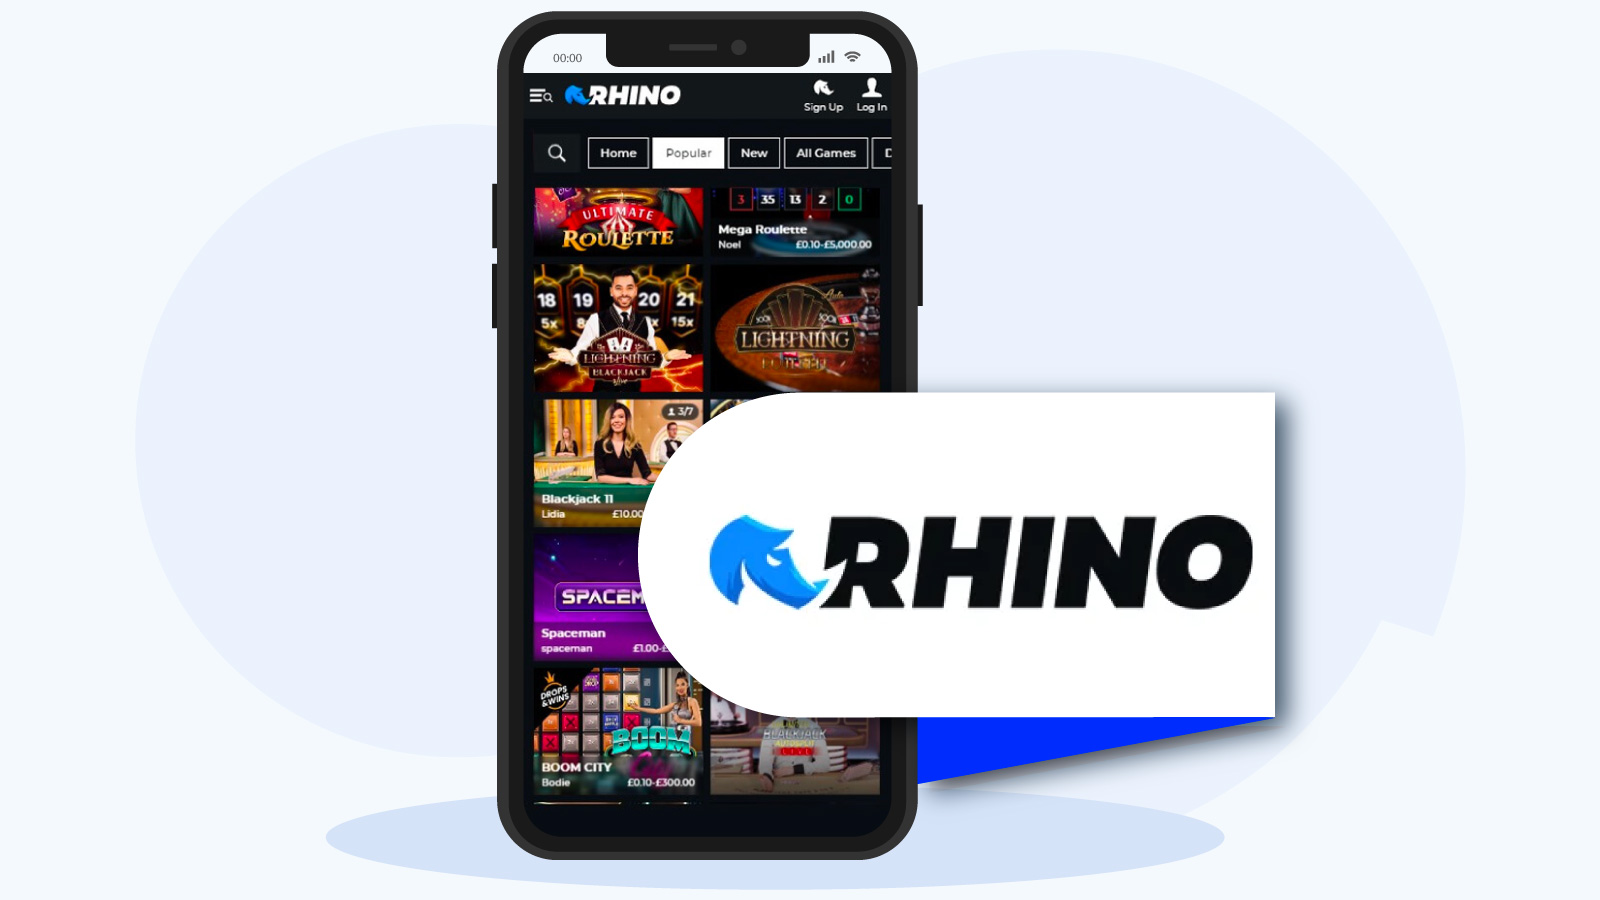 Rhino.bet Casino – Best Android Casino for Usability